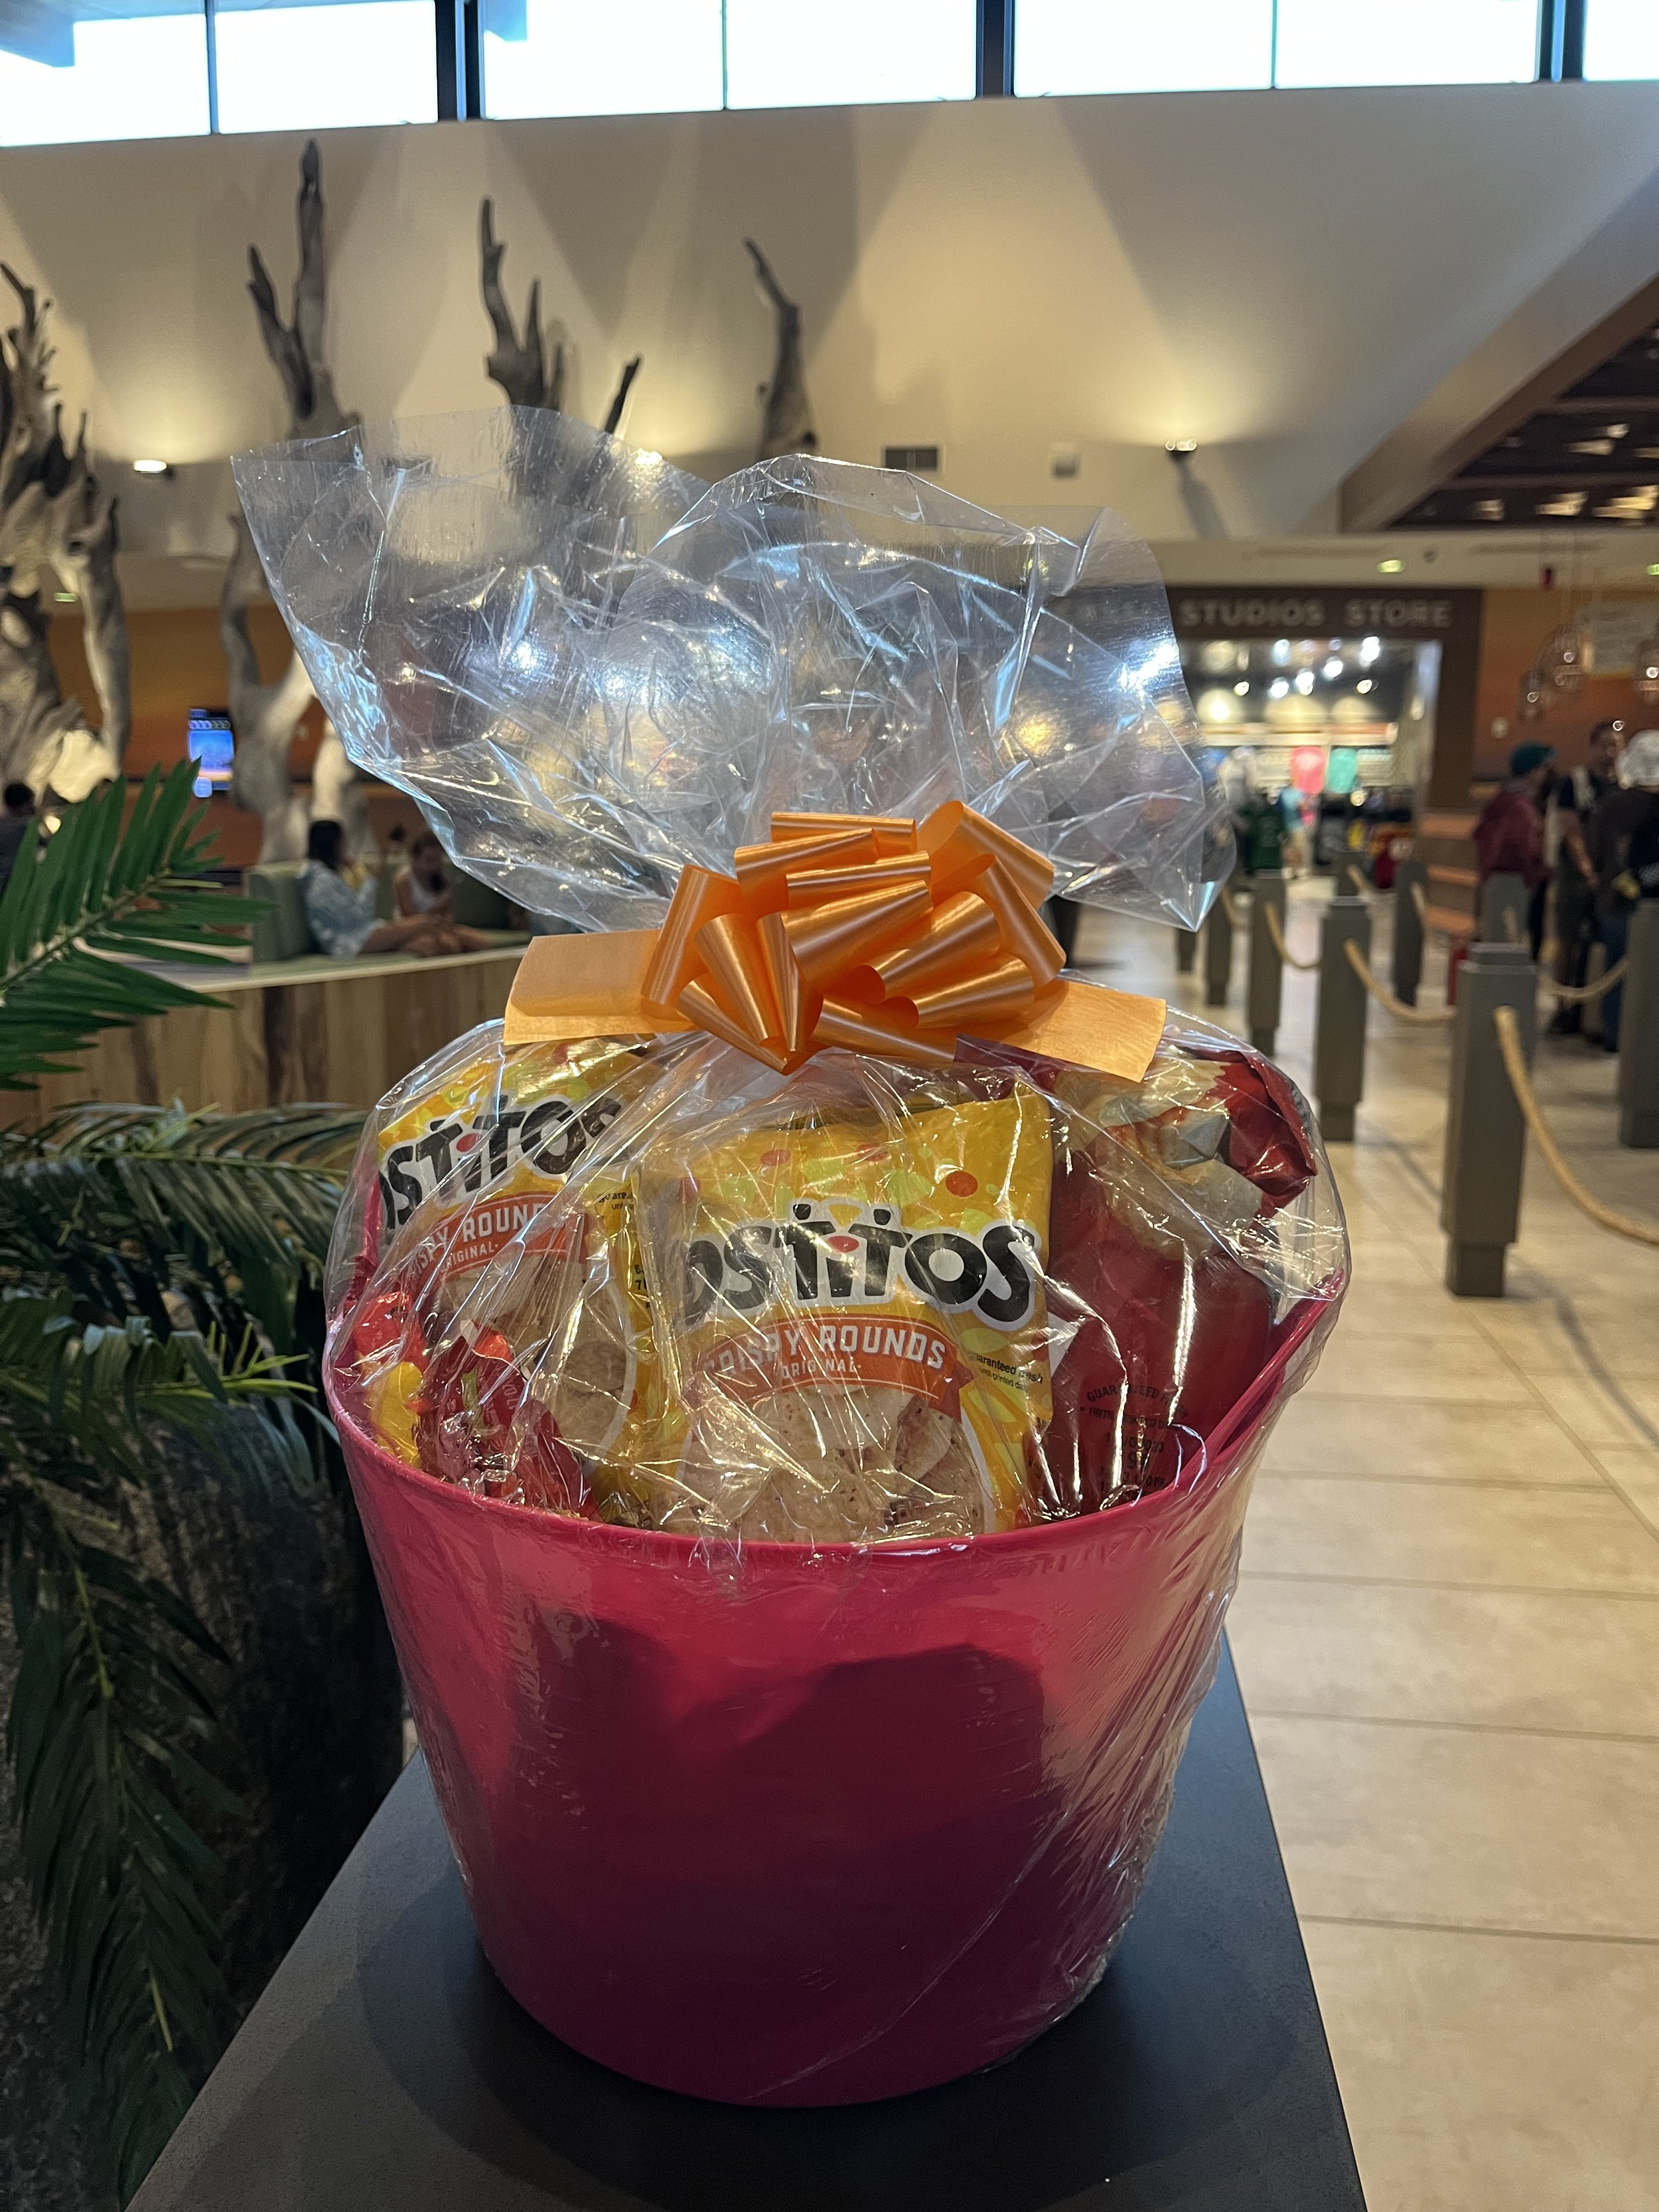 Shareable Room Basket - A Treat for the Whole Family!